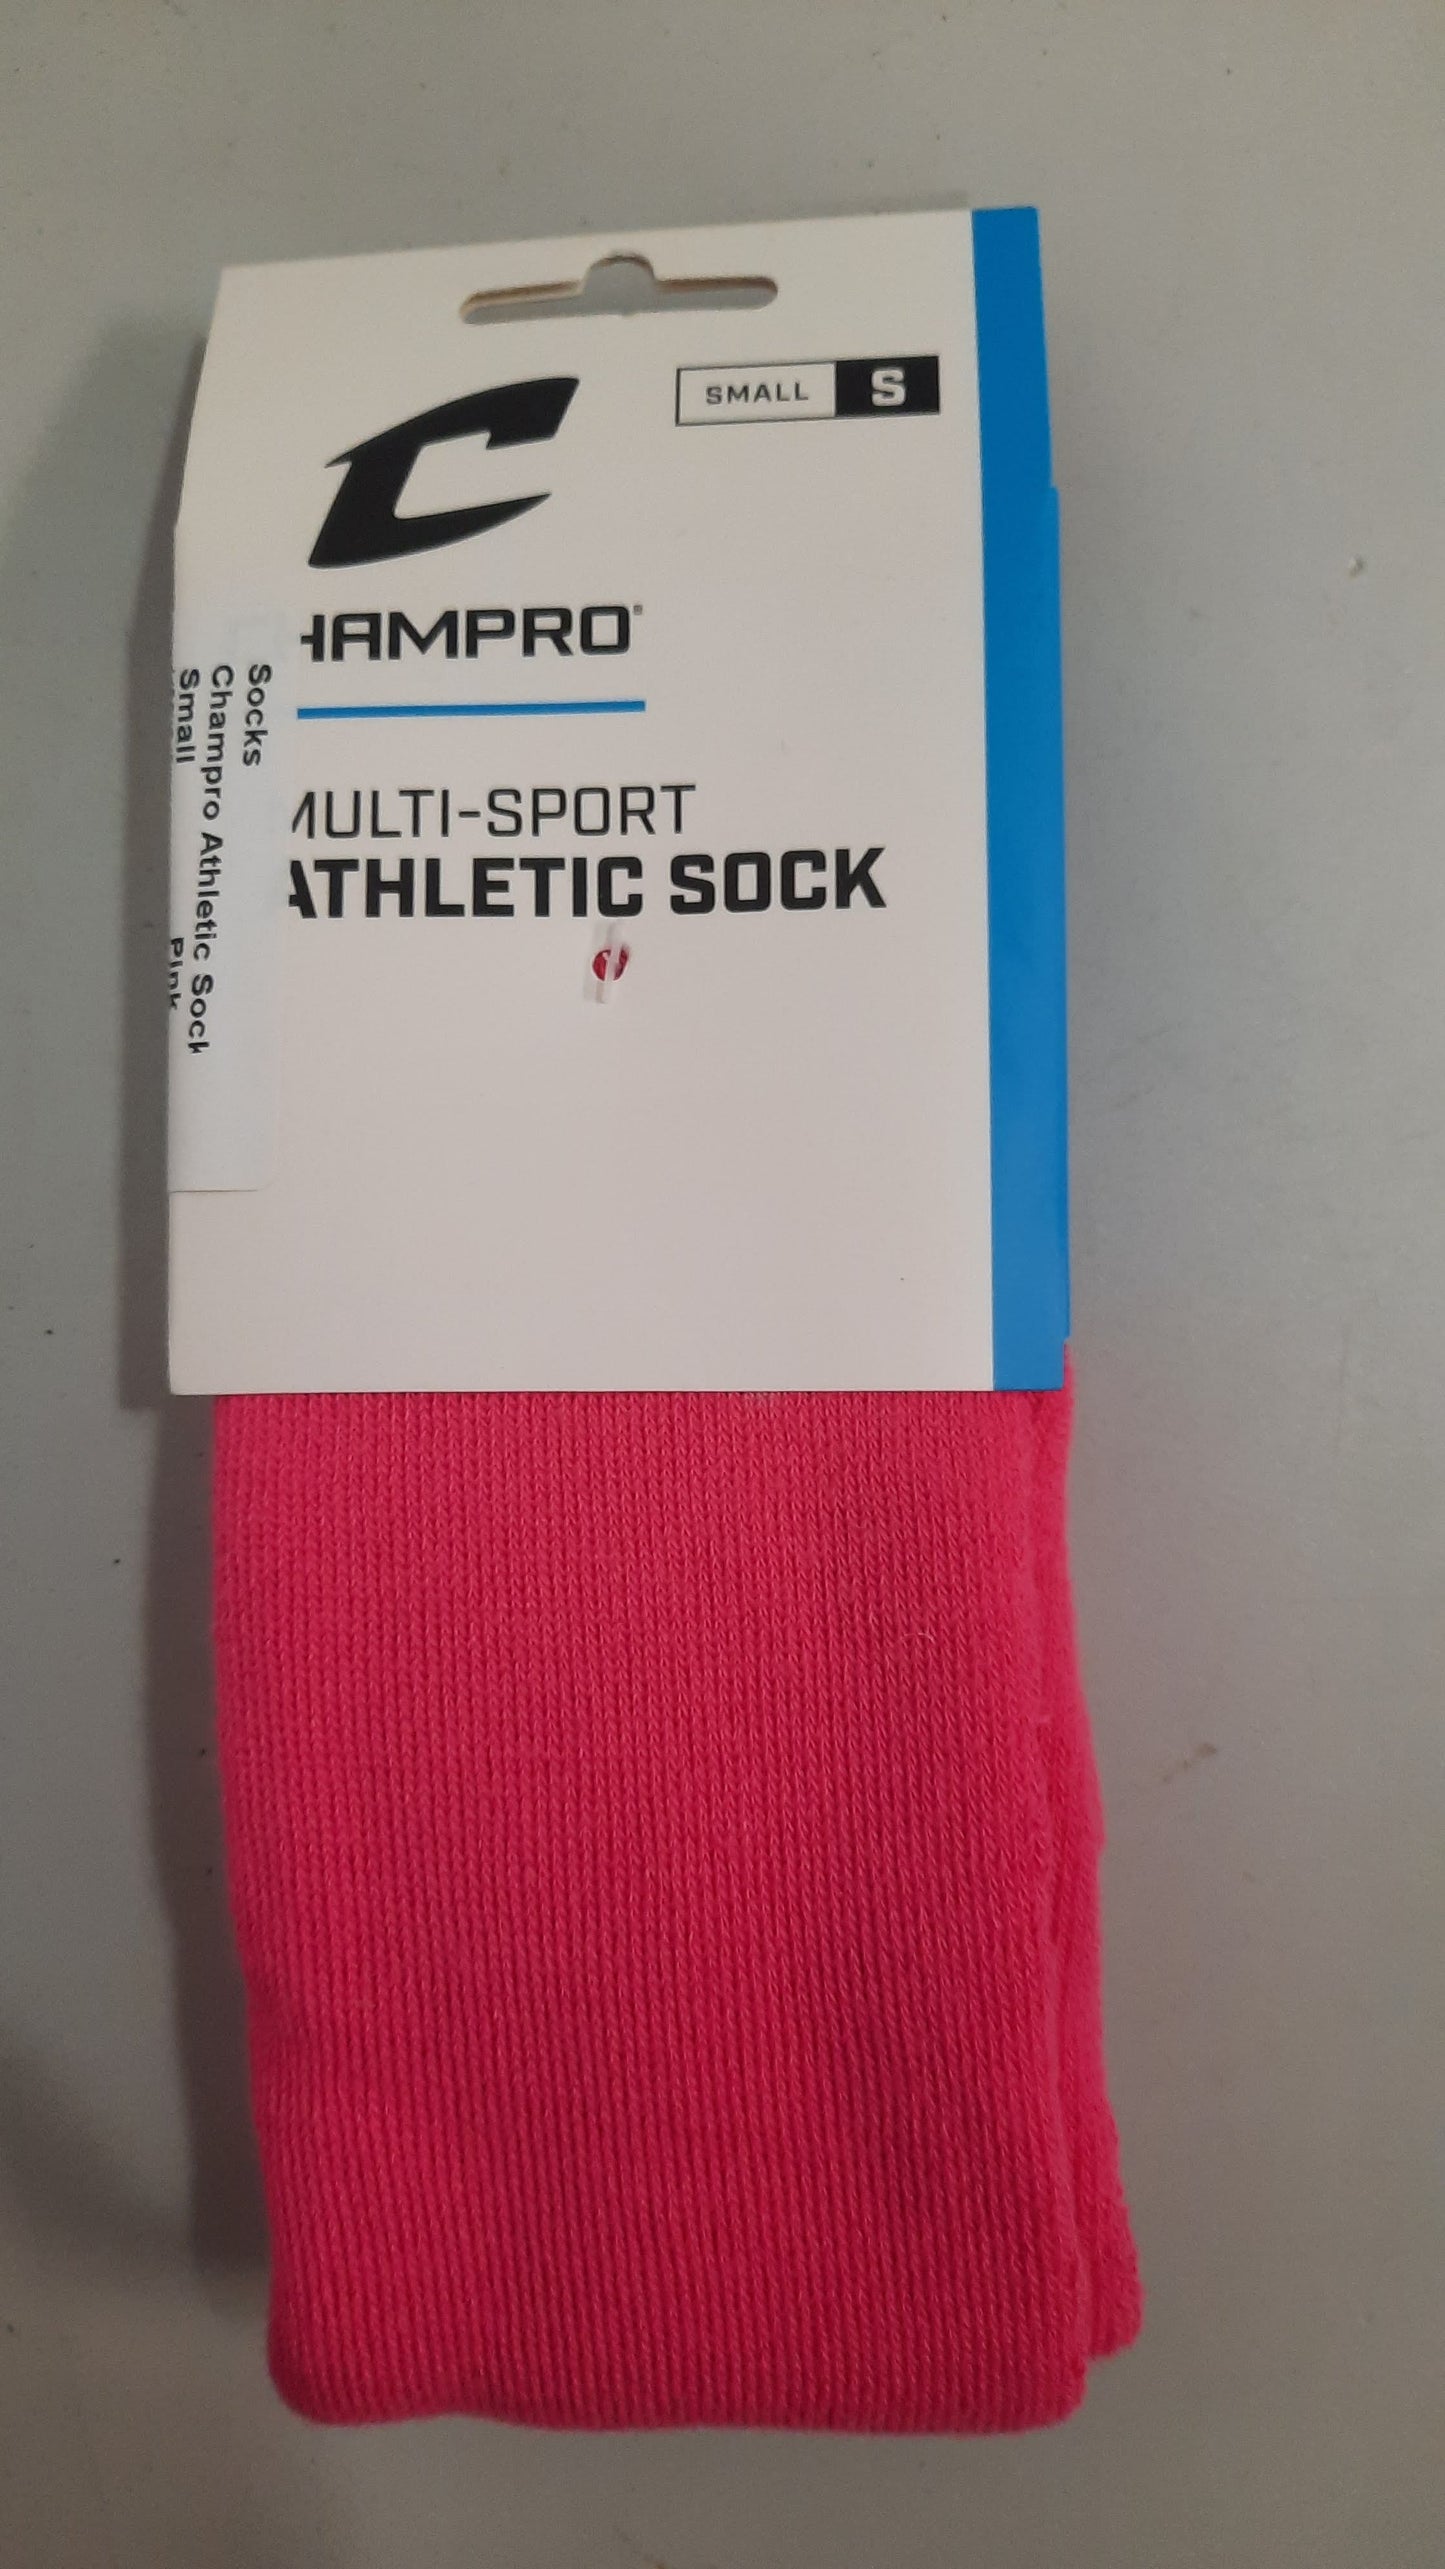 Champro Athletic Socks Size XS Color Pink Multi-Sport Condition New